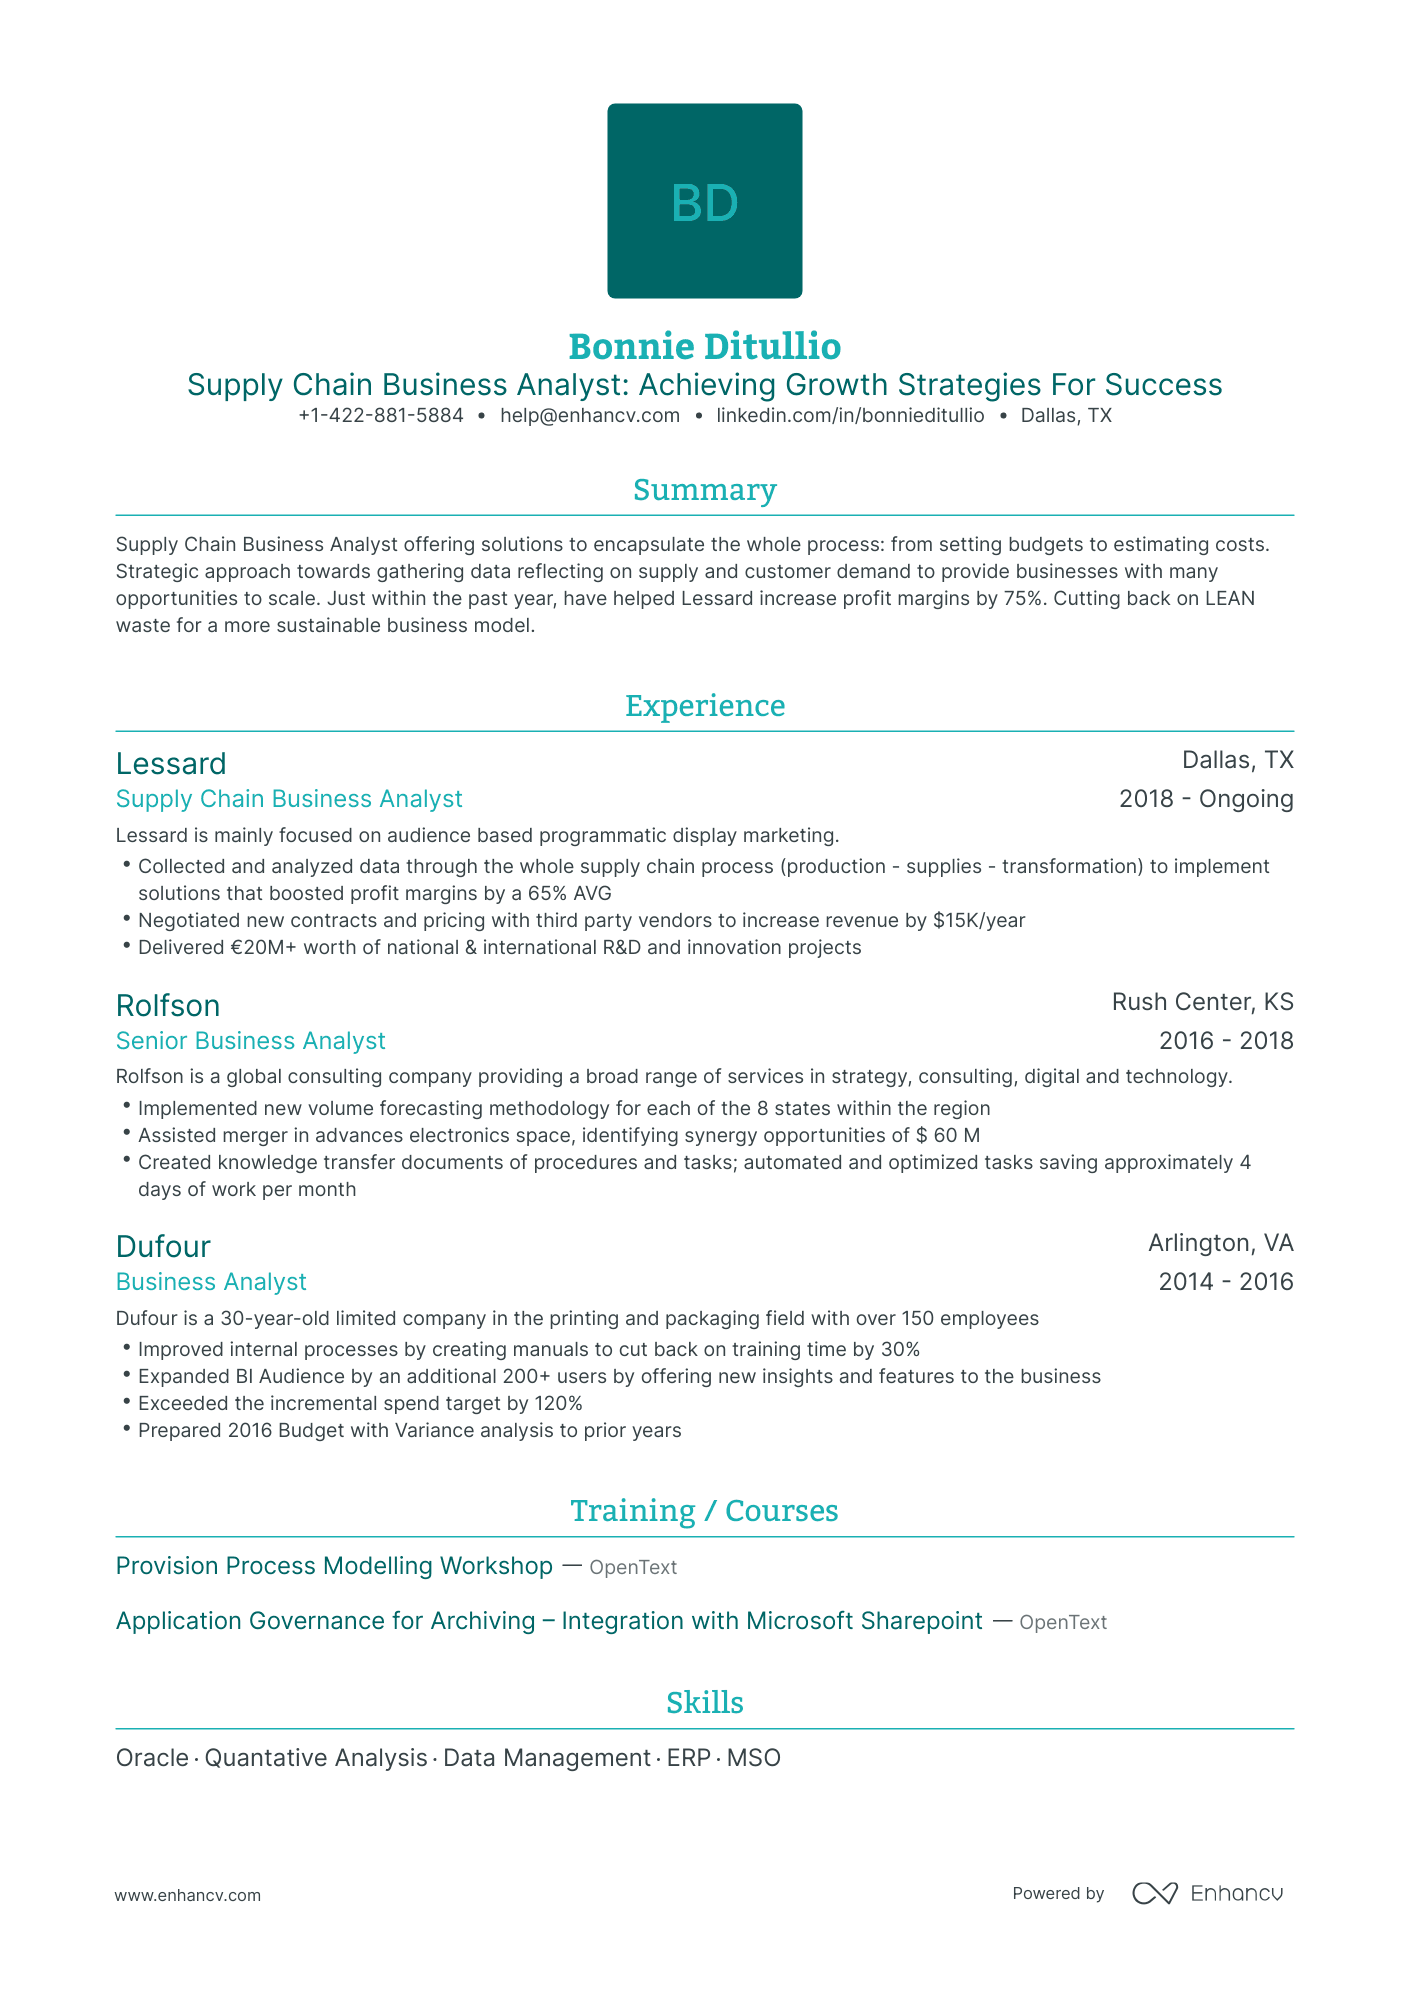 Traditional Supply Chain Business Analyst Resume Template